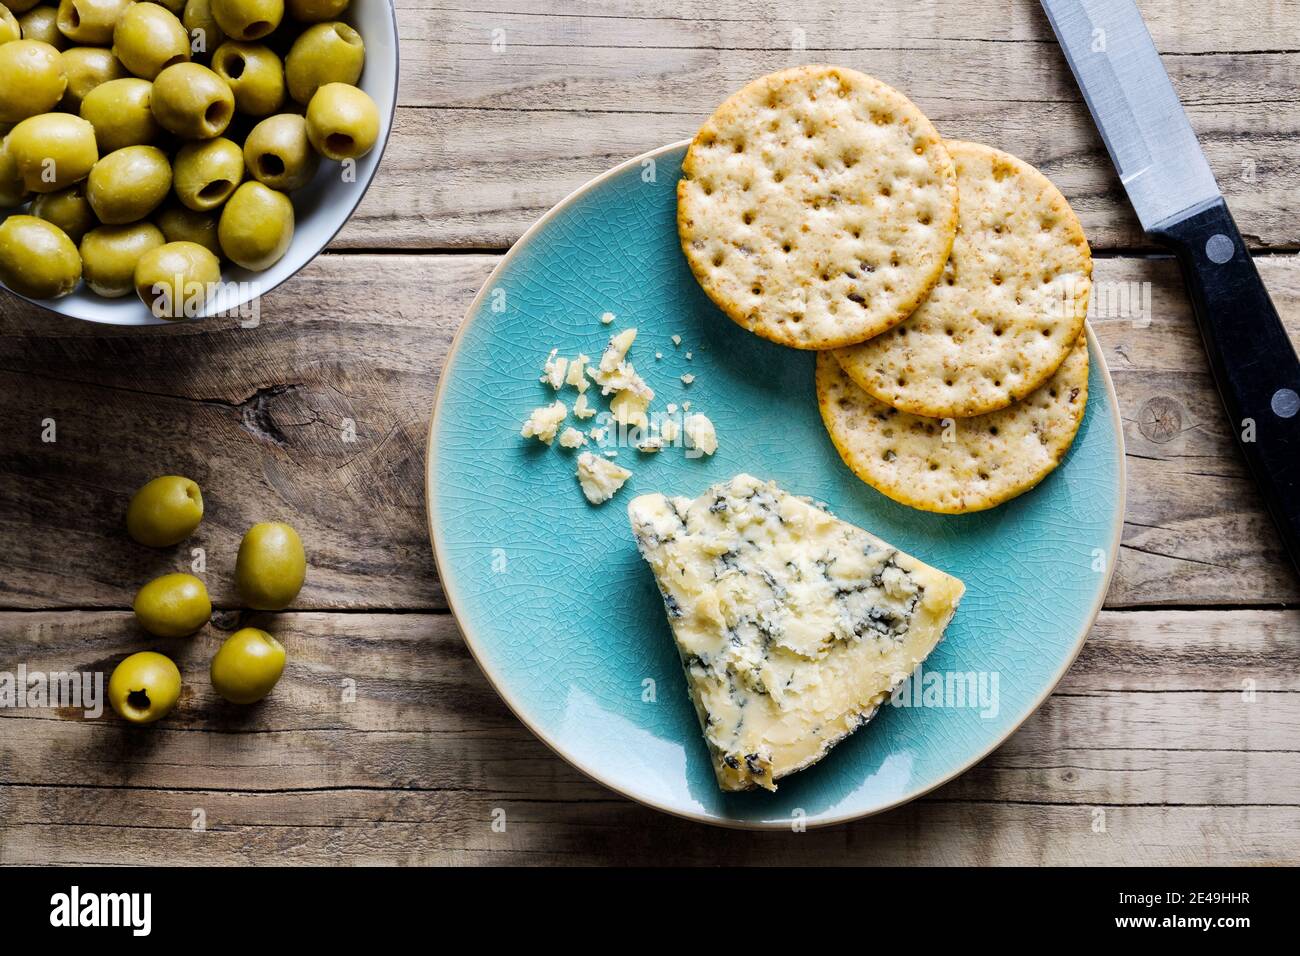 A slice of mature Stilton cheese on a plate with round wholewheat crackers with some green olives in a small bowl to the side Stock Photo